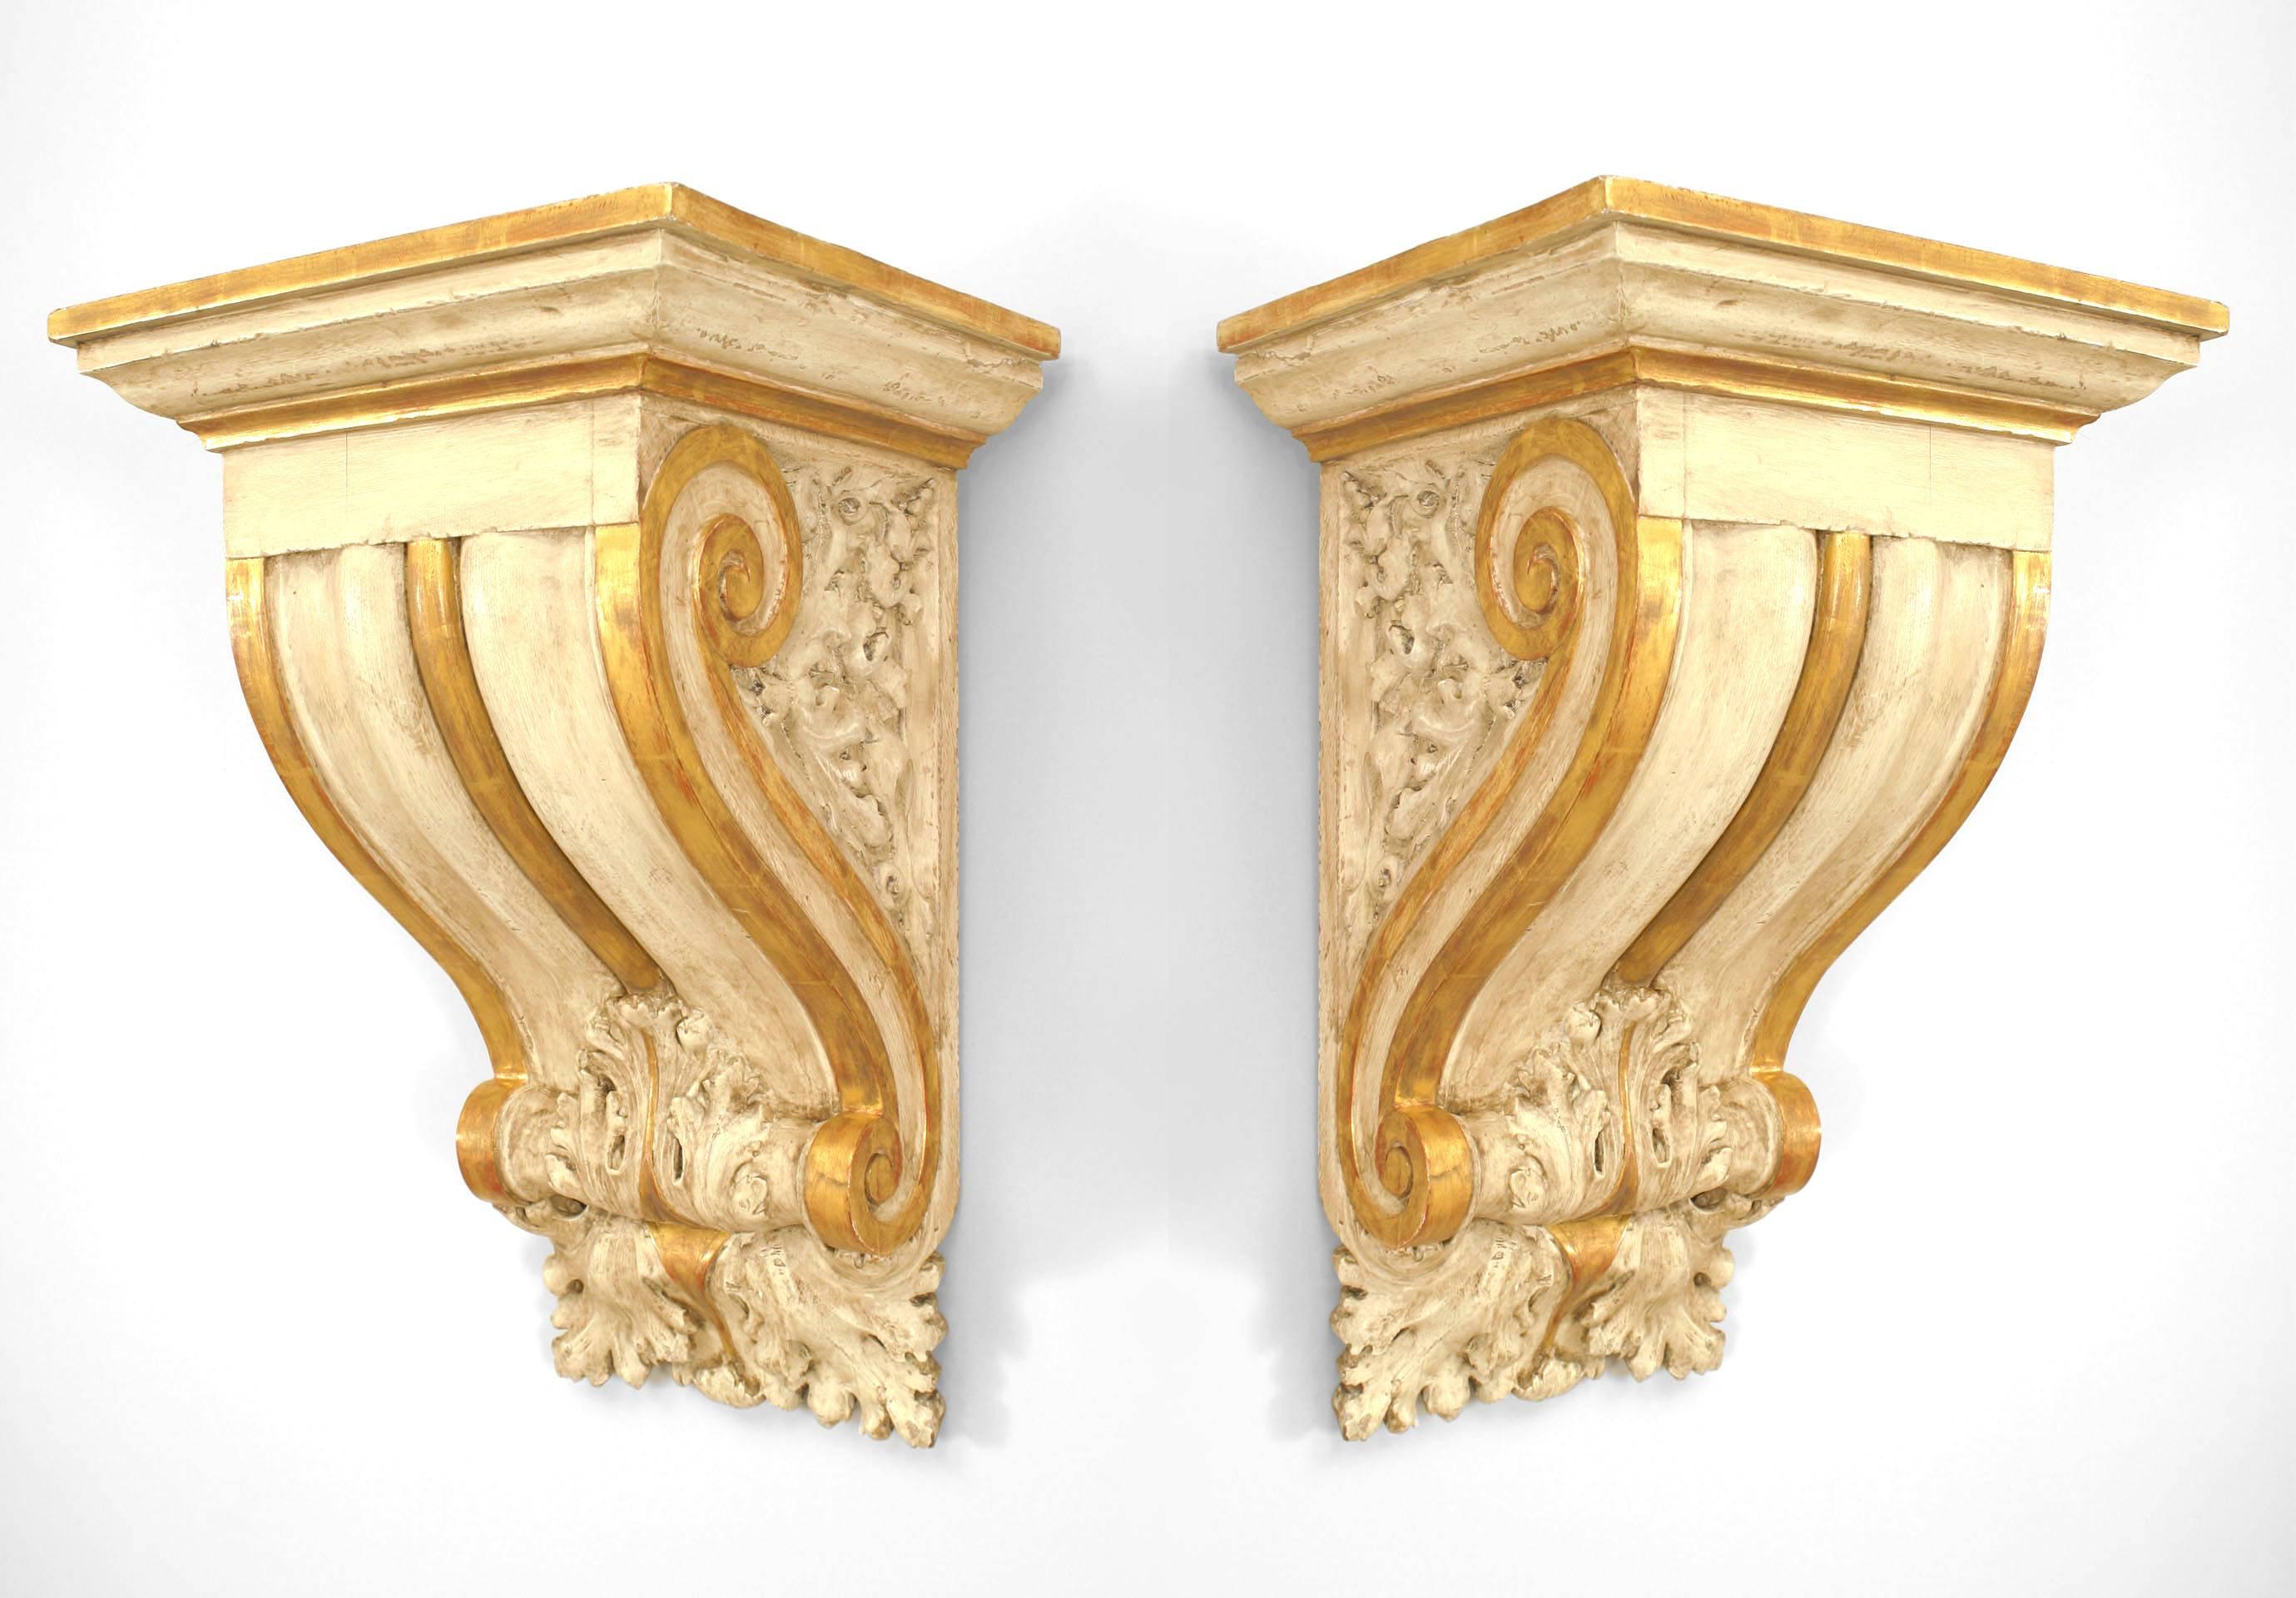 Pair of Italian Neo-classic cream painted and gilt trimmed carved wall bracket shelves with a scroll design and decorated with carved leaves (2-PRICED PER Pair)
